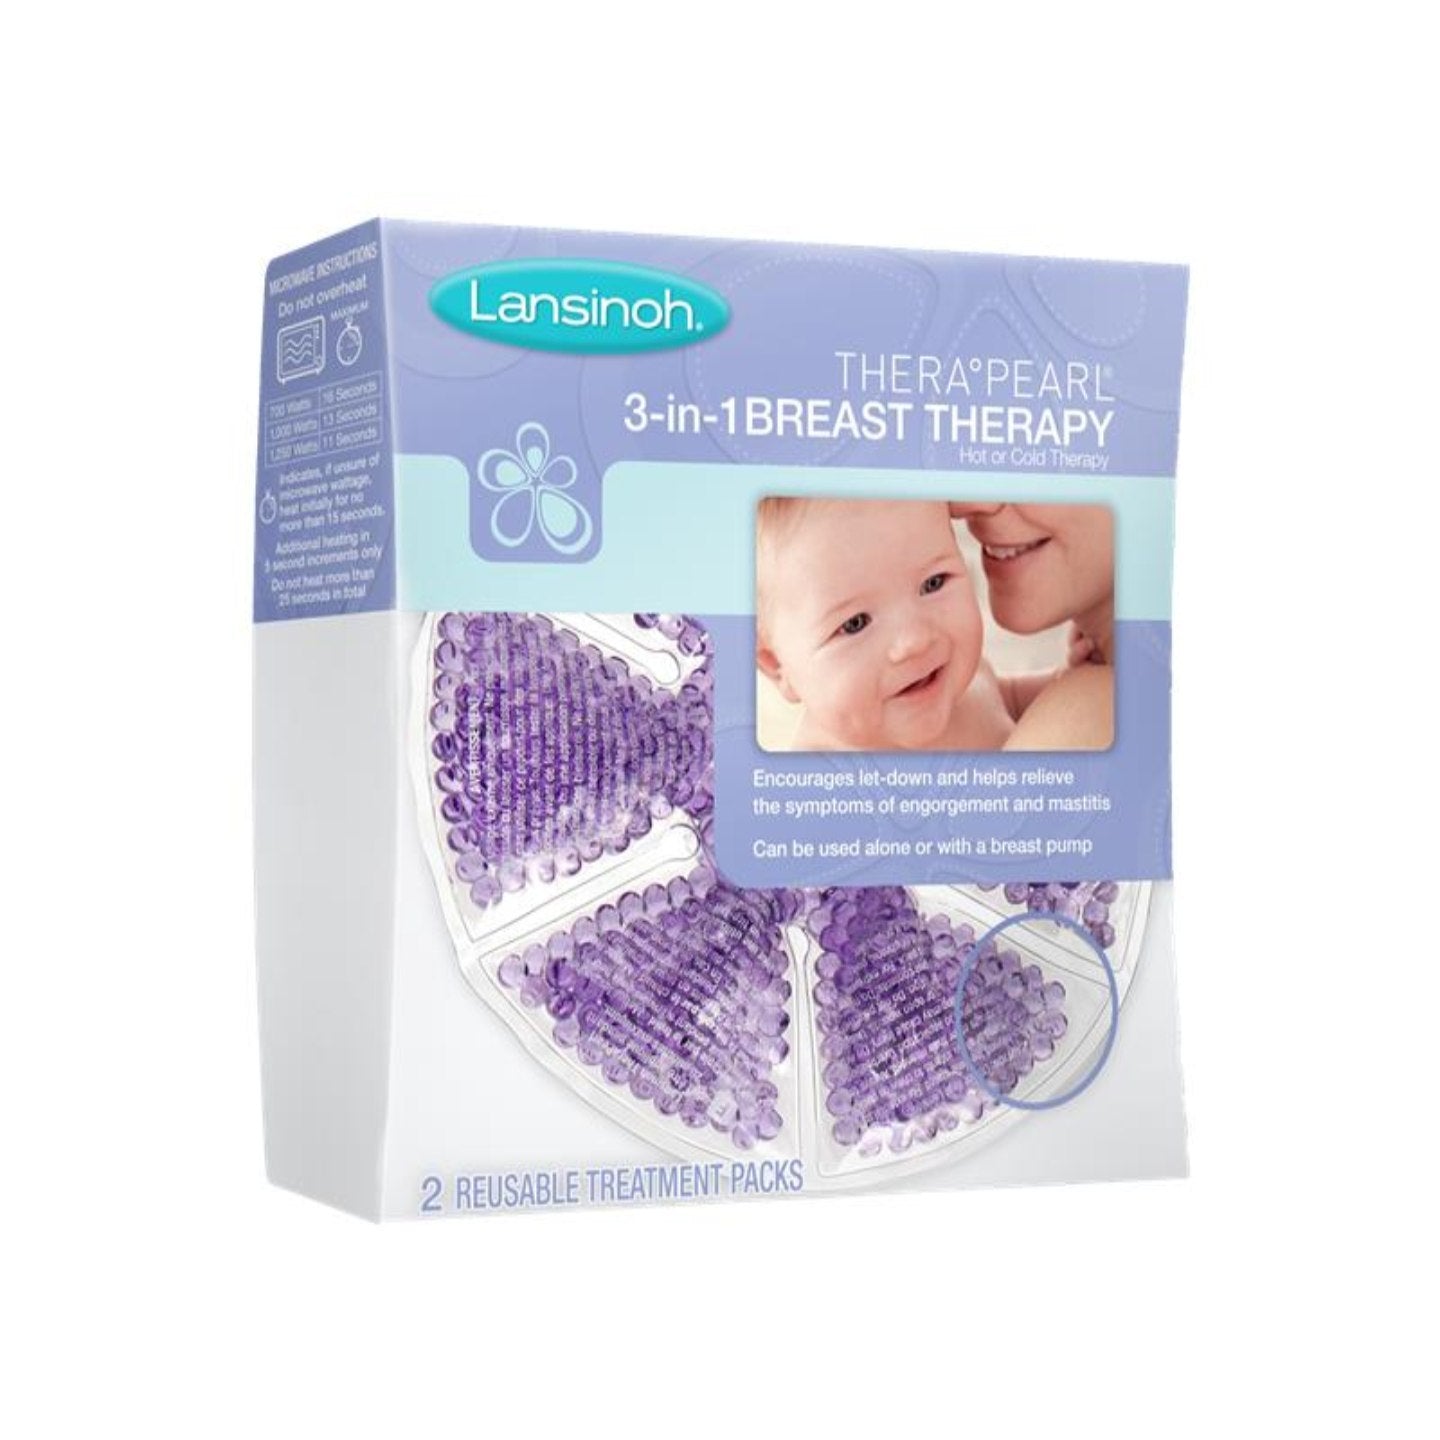  Lansinoh TheraPearl 3-in-1 Hot or Cold Breast Therapy